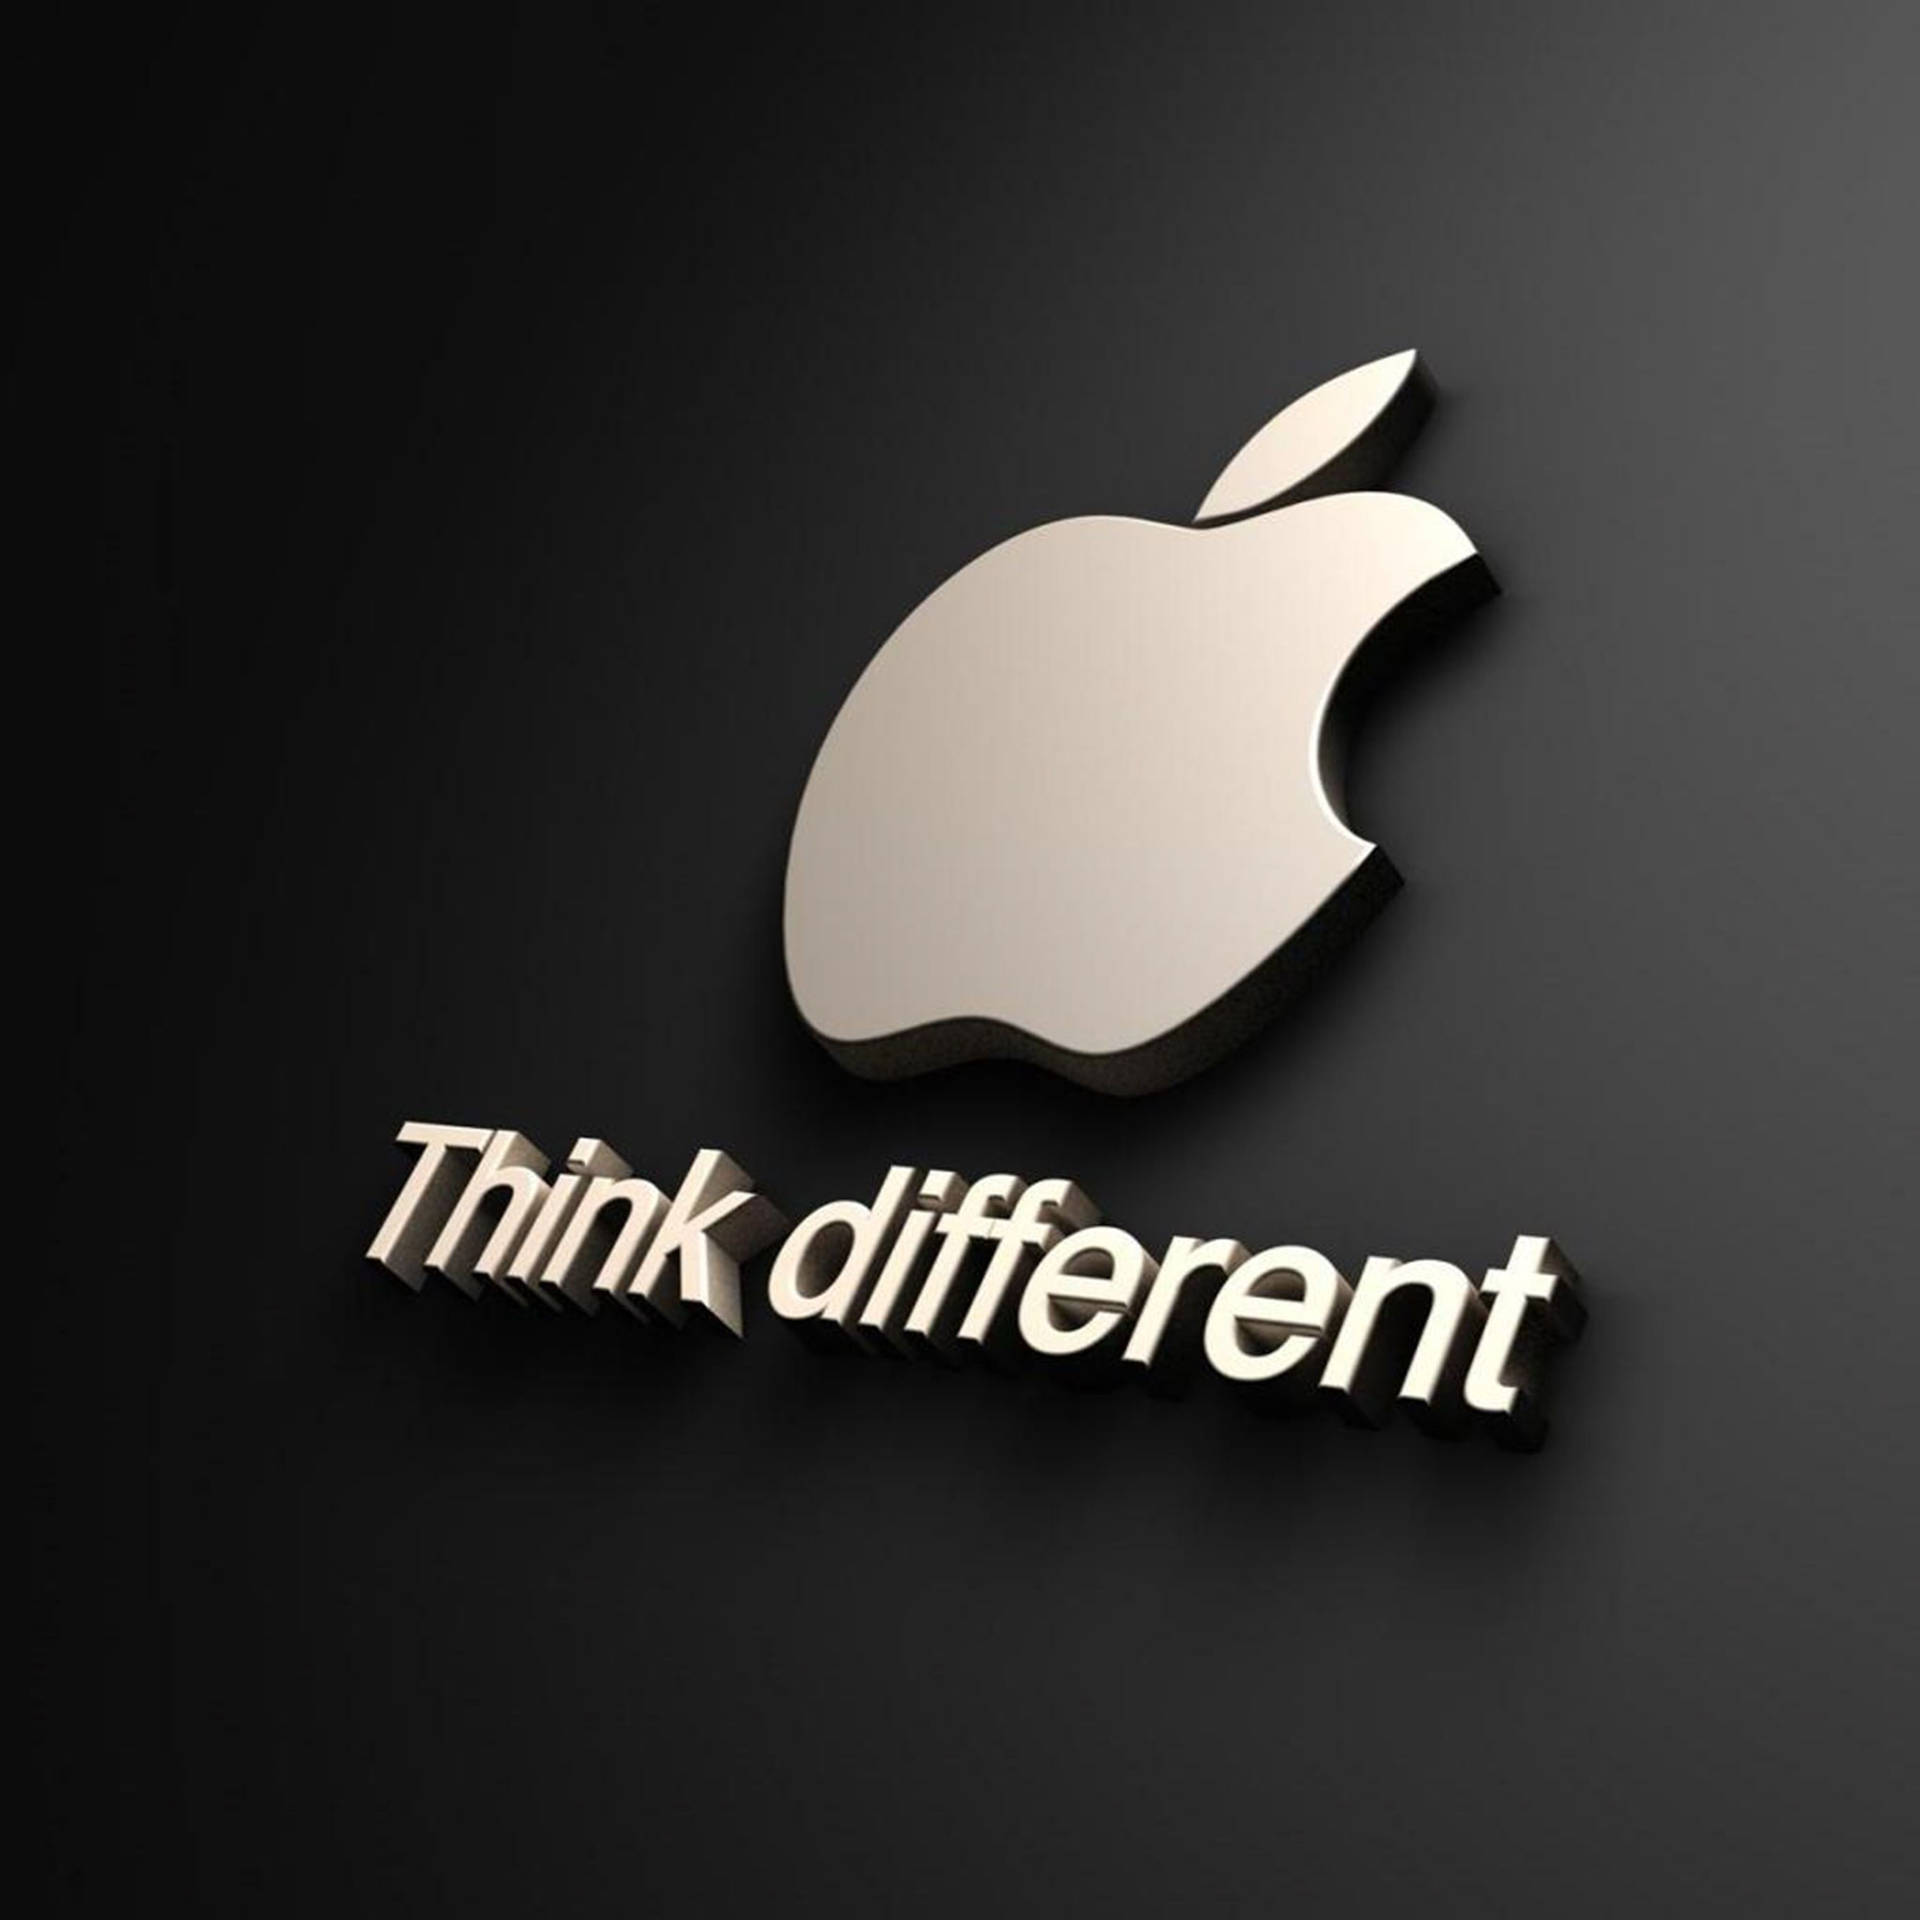 3d Apple Iphone Logo And Slogan Background